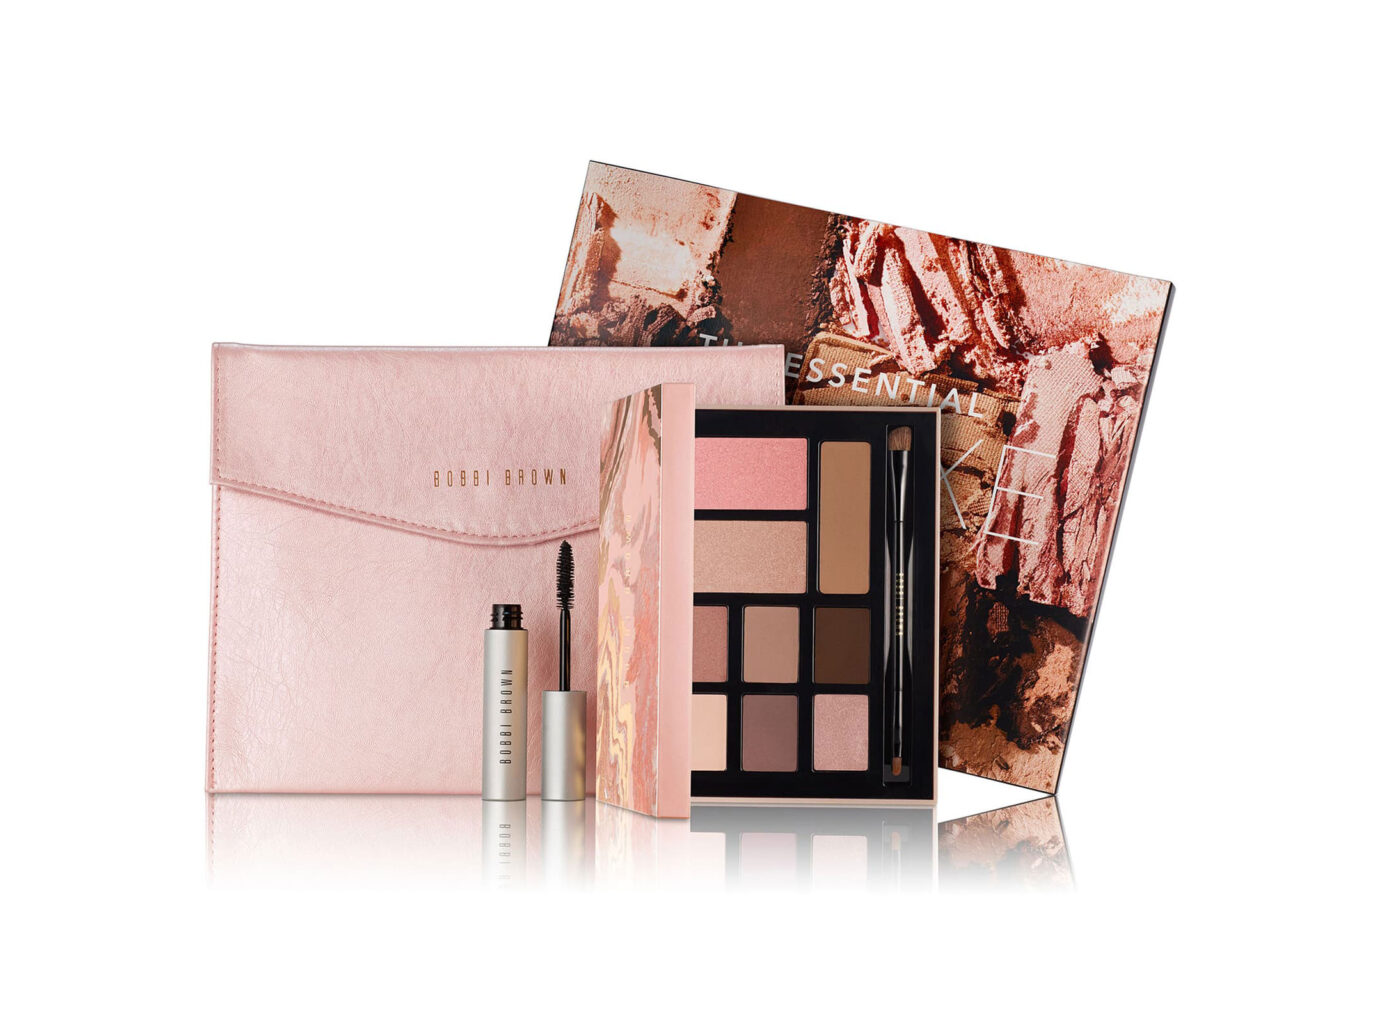 Bobbi Brown The Essential Deluxe Eyeshadow & Face Palette